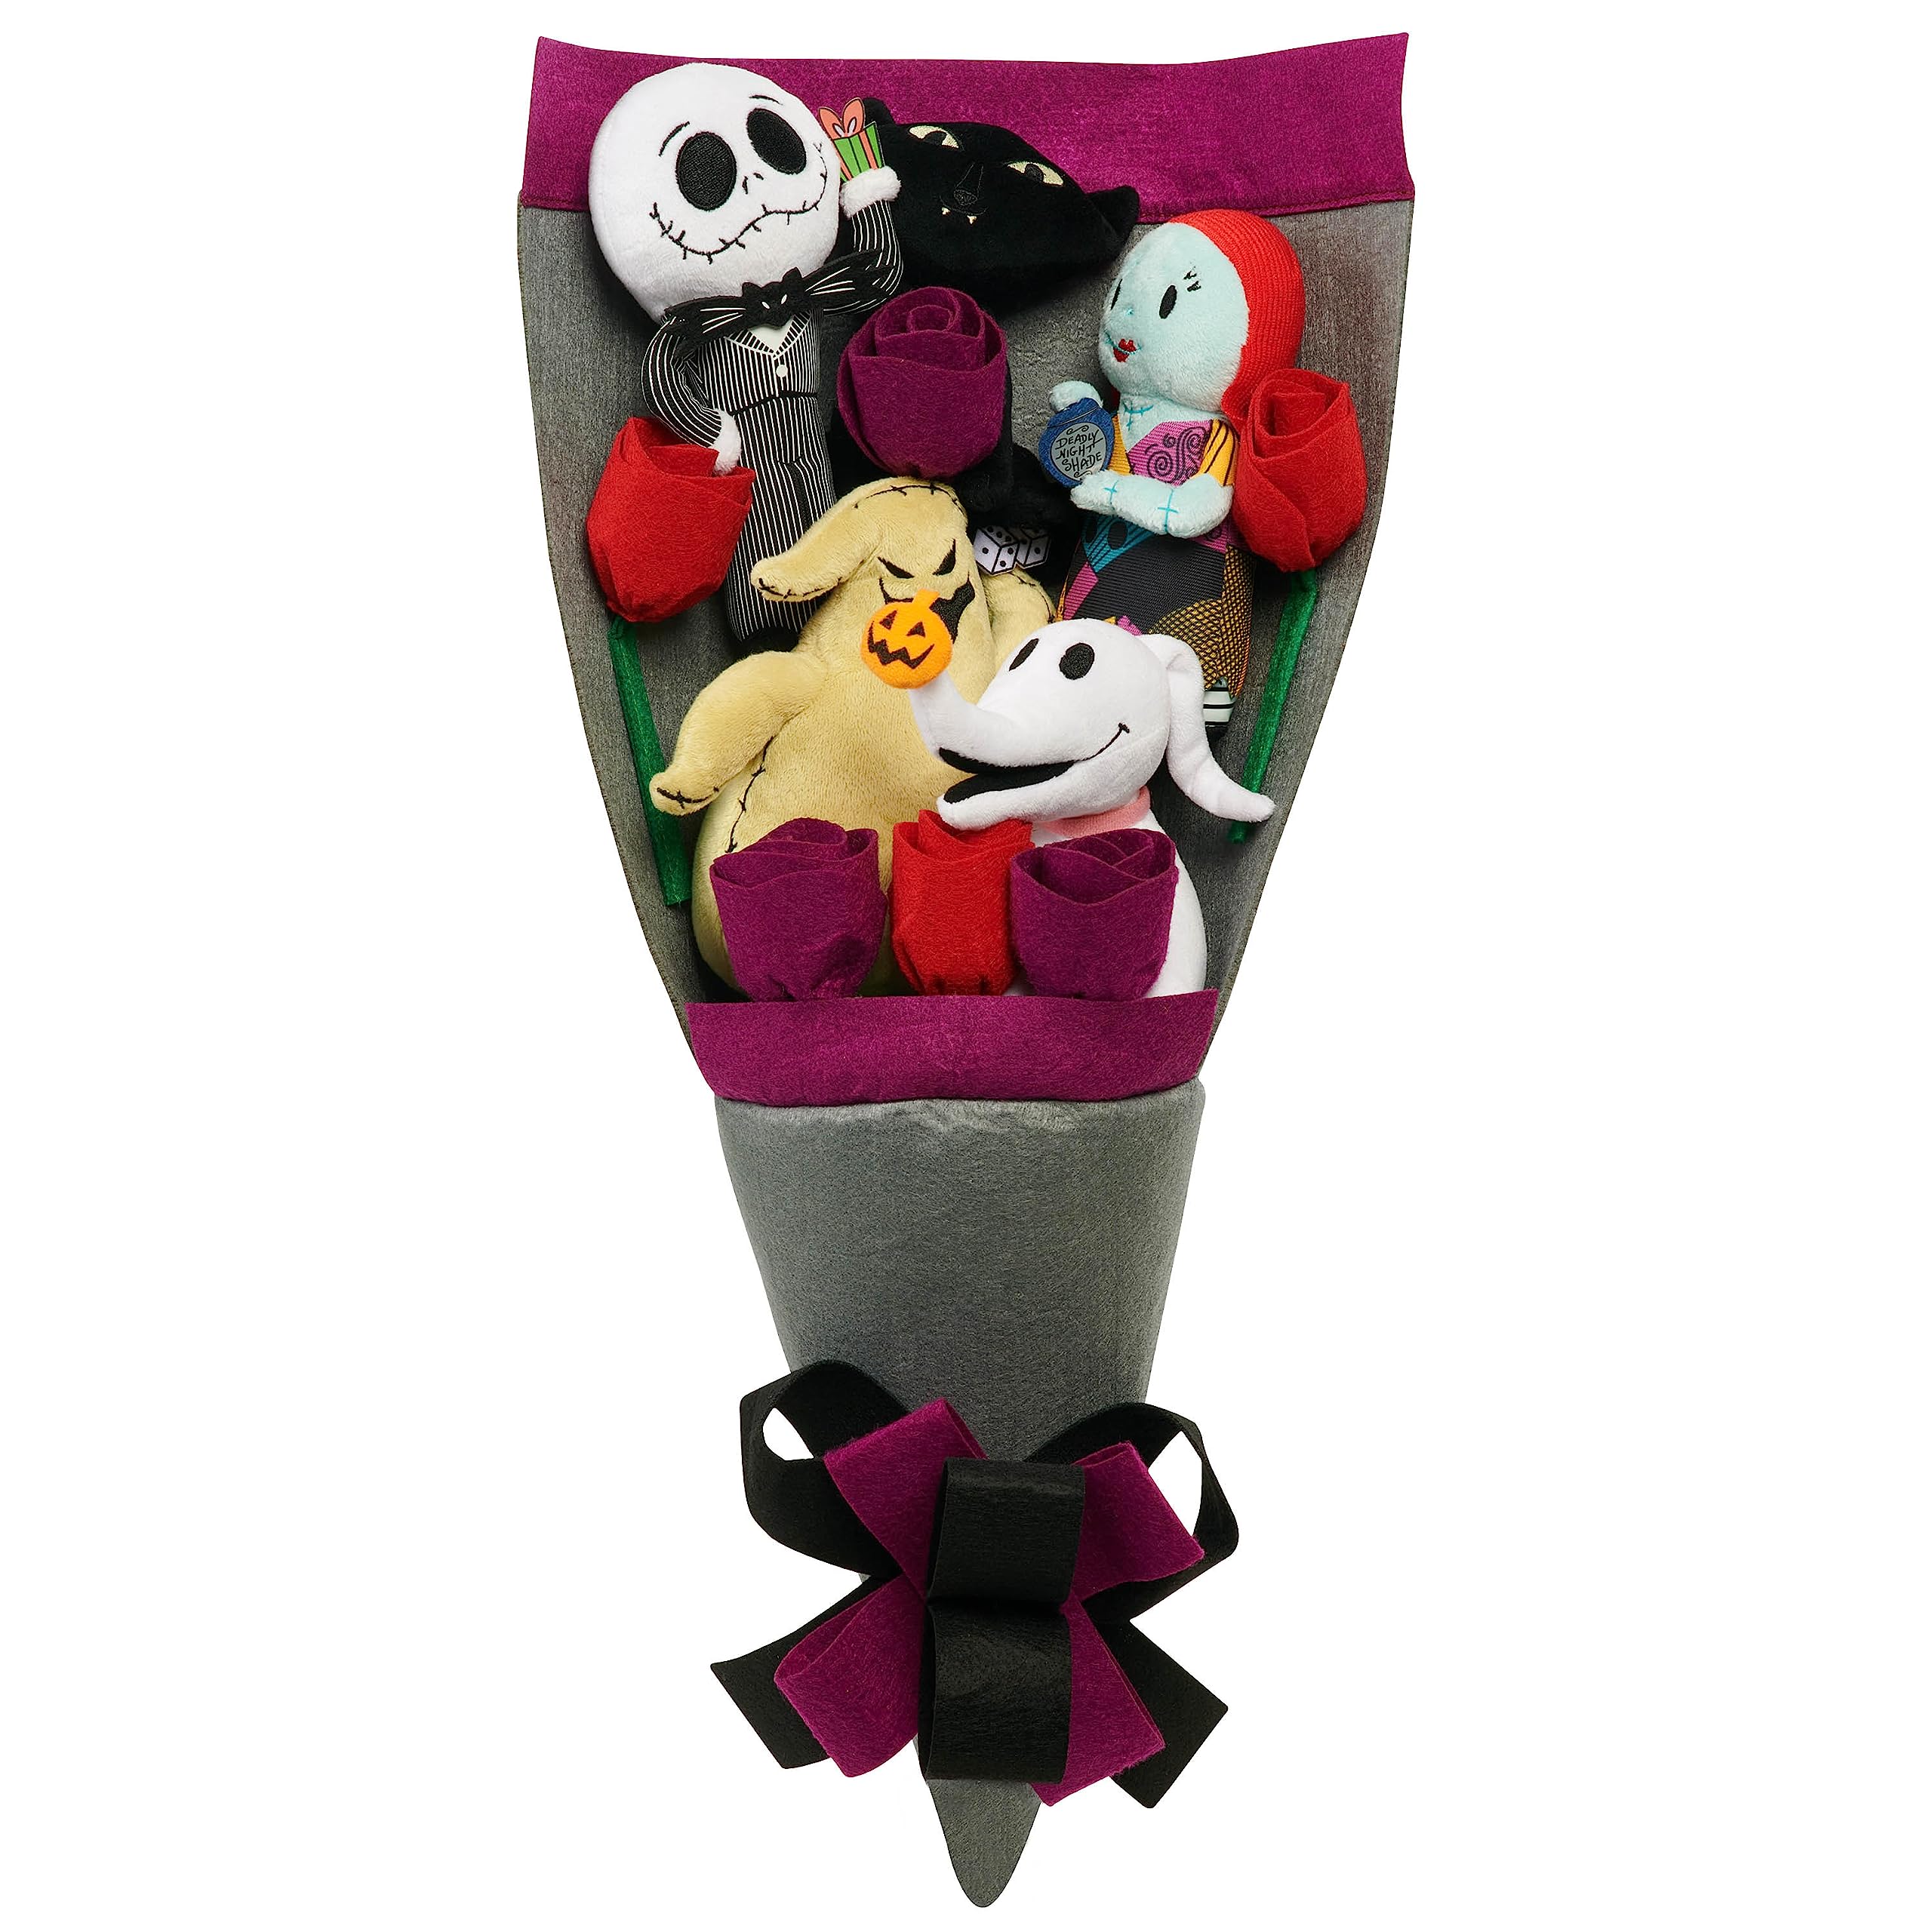 20" Disney Tim Burton's The Nightmare Before Christmas Plushies Bouquet w/ 5 Character Plushies and 6 Fabric Roses $24.28 or Less + Free Shipping w/ Prime or on $35+